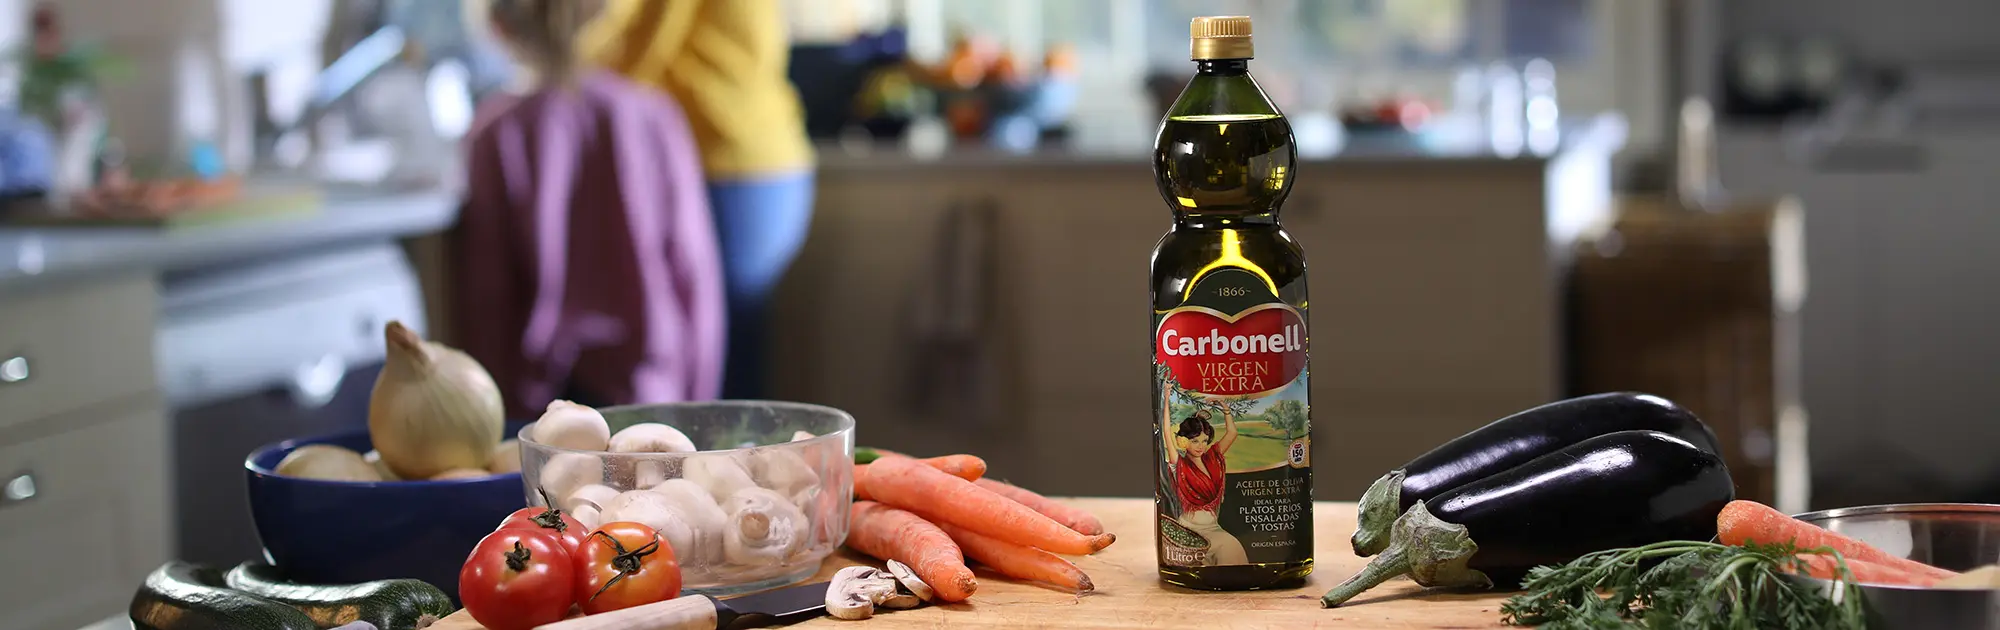 Is extra virgin olive oil good for cooking?